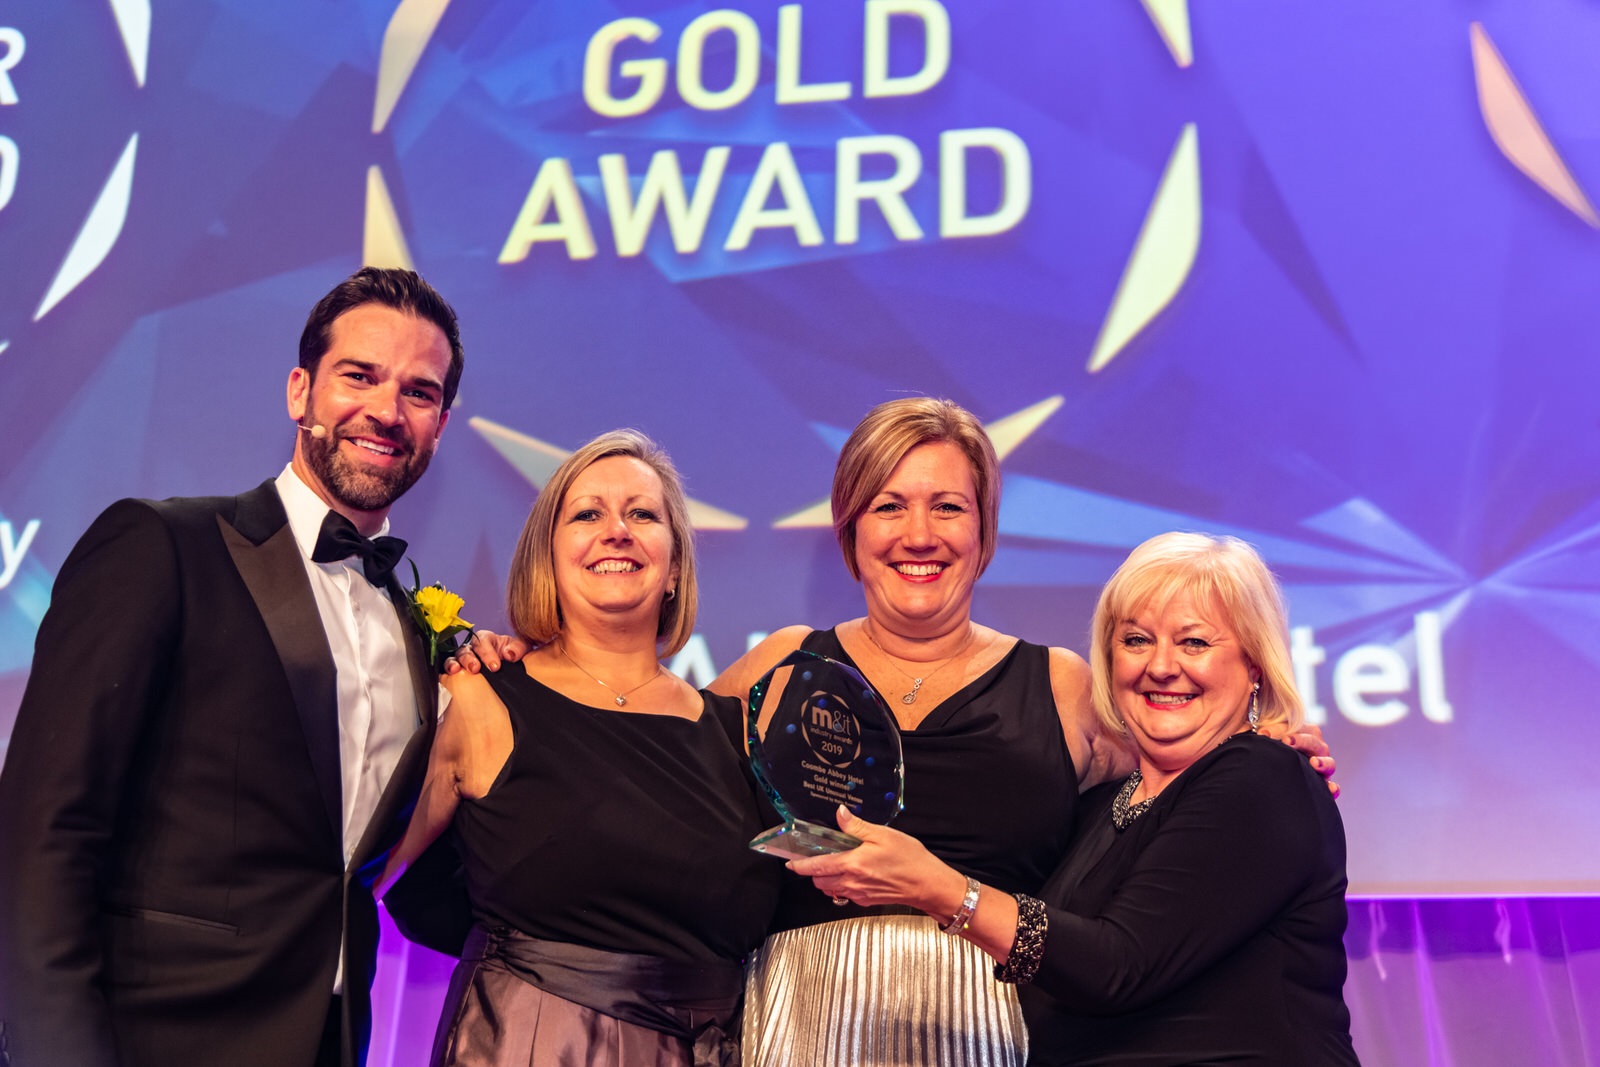 Golden recognition for Coombe Abbey Hotel in prestigious national awards